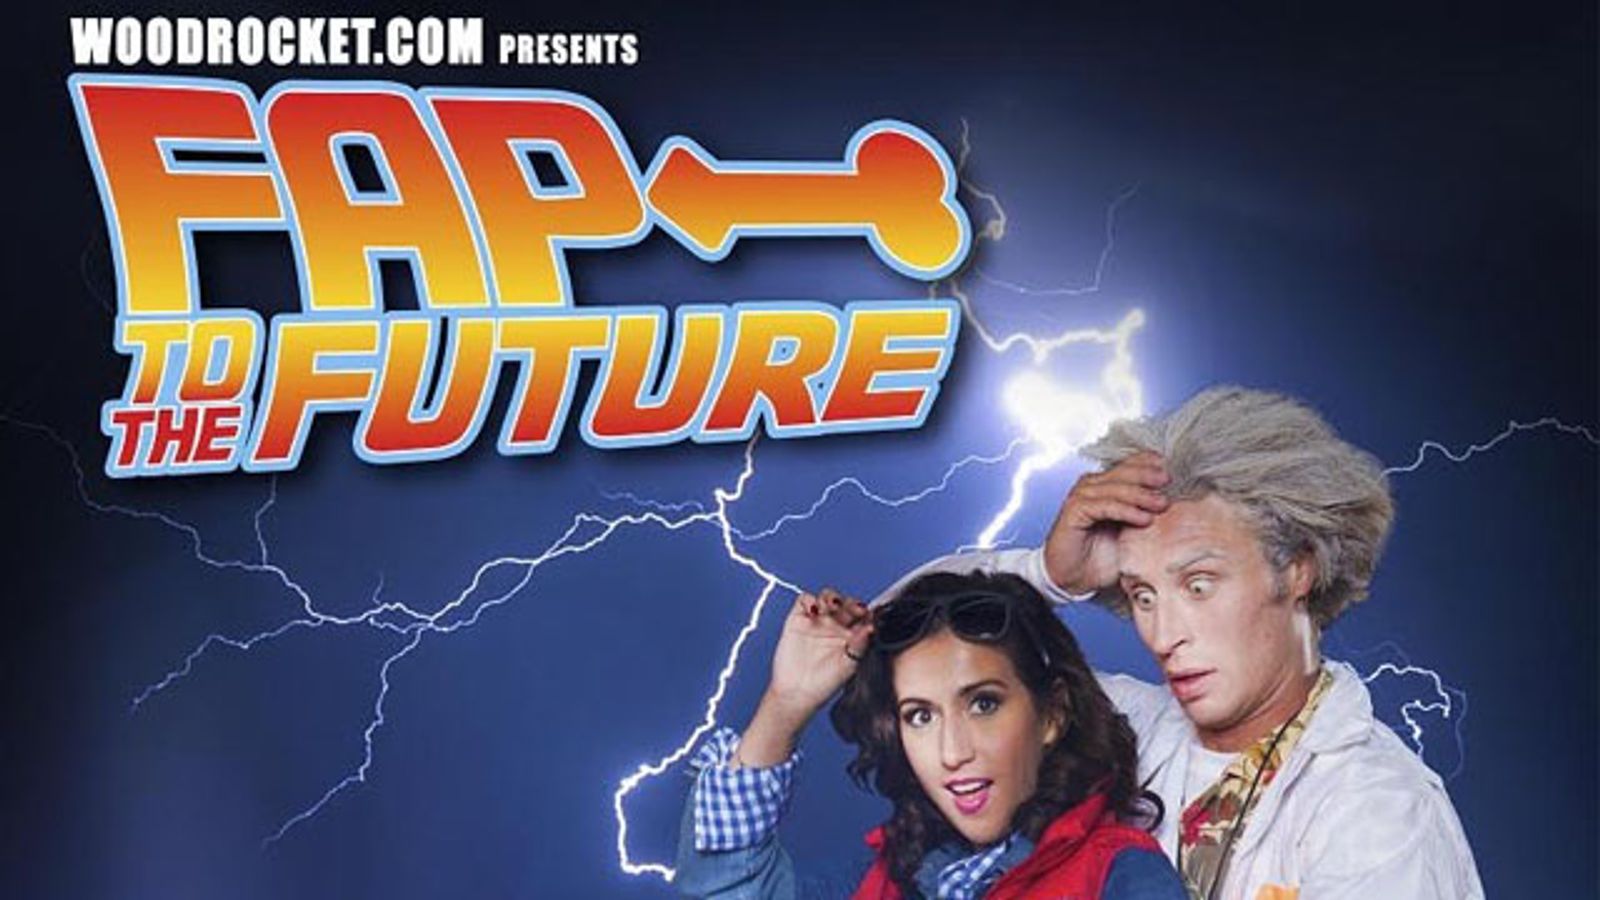 ‘Back To The Future’ Latest To Get Porn Parody Treatment From WoodRocket.com